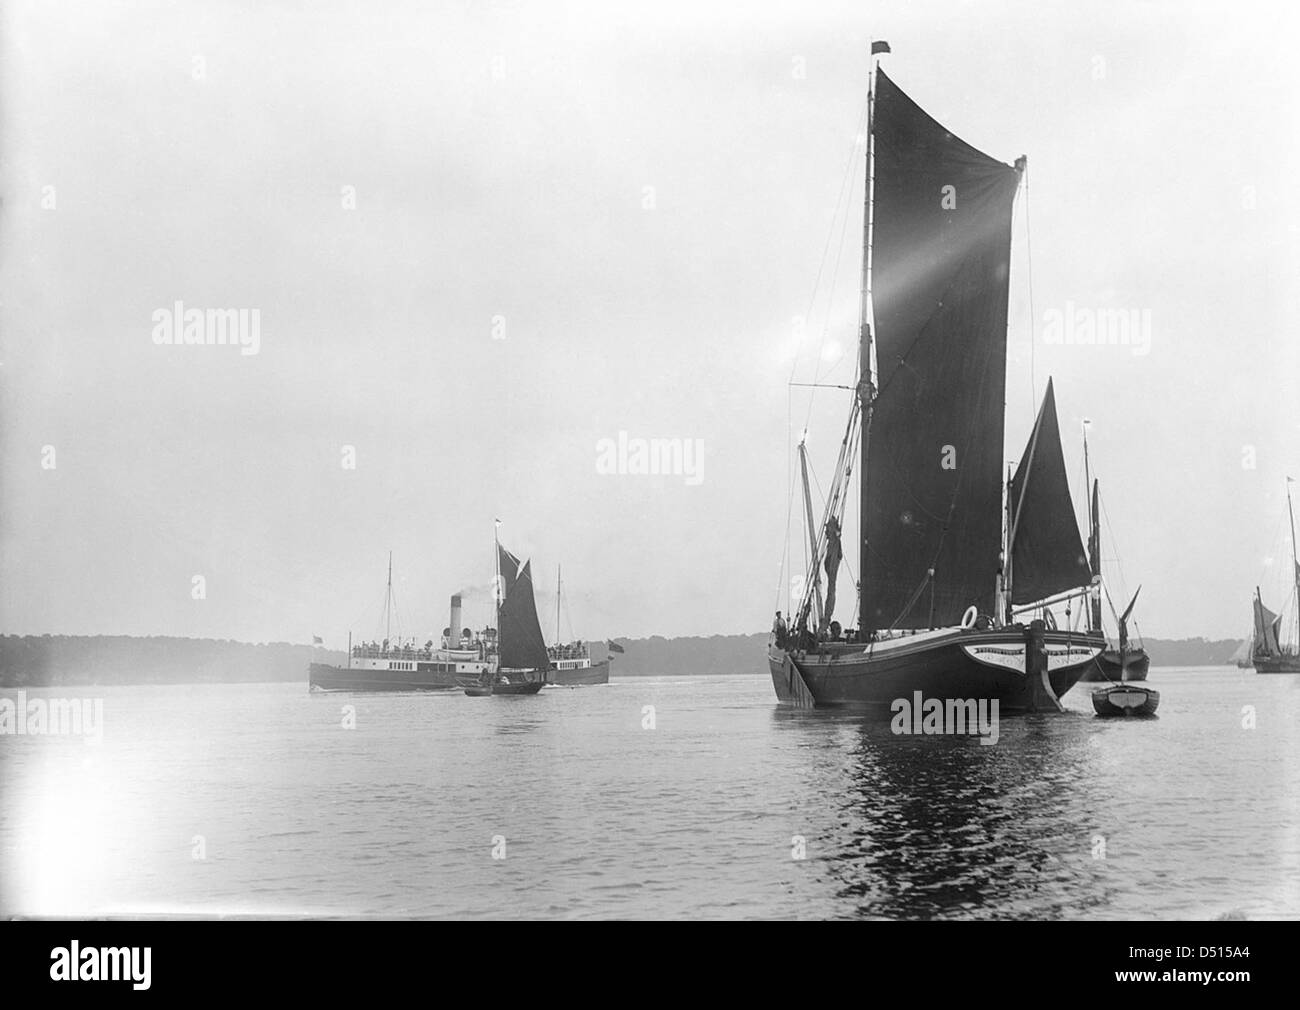 A view across the River Orwell from near Pin Mill with the spritsail barge 'Freston Tower' in the foreground Stock Photo